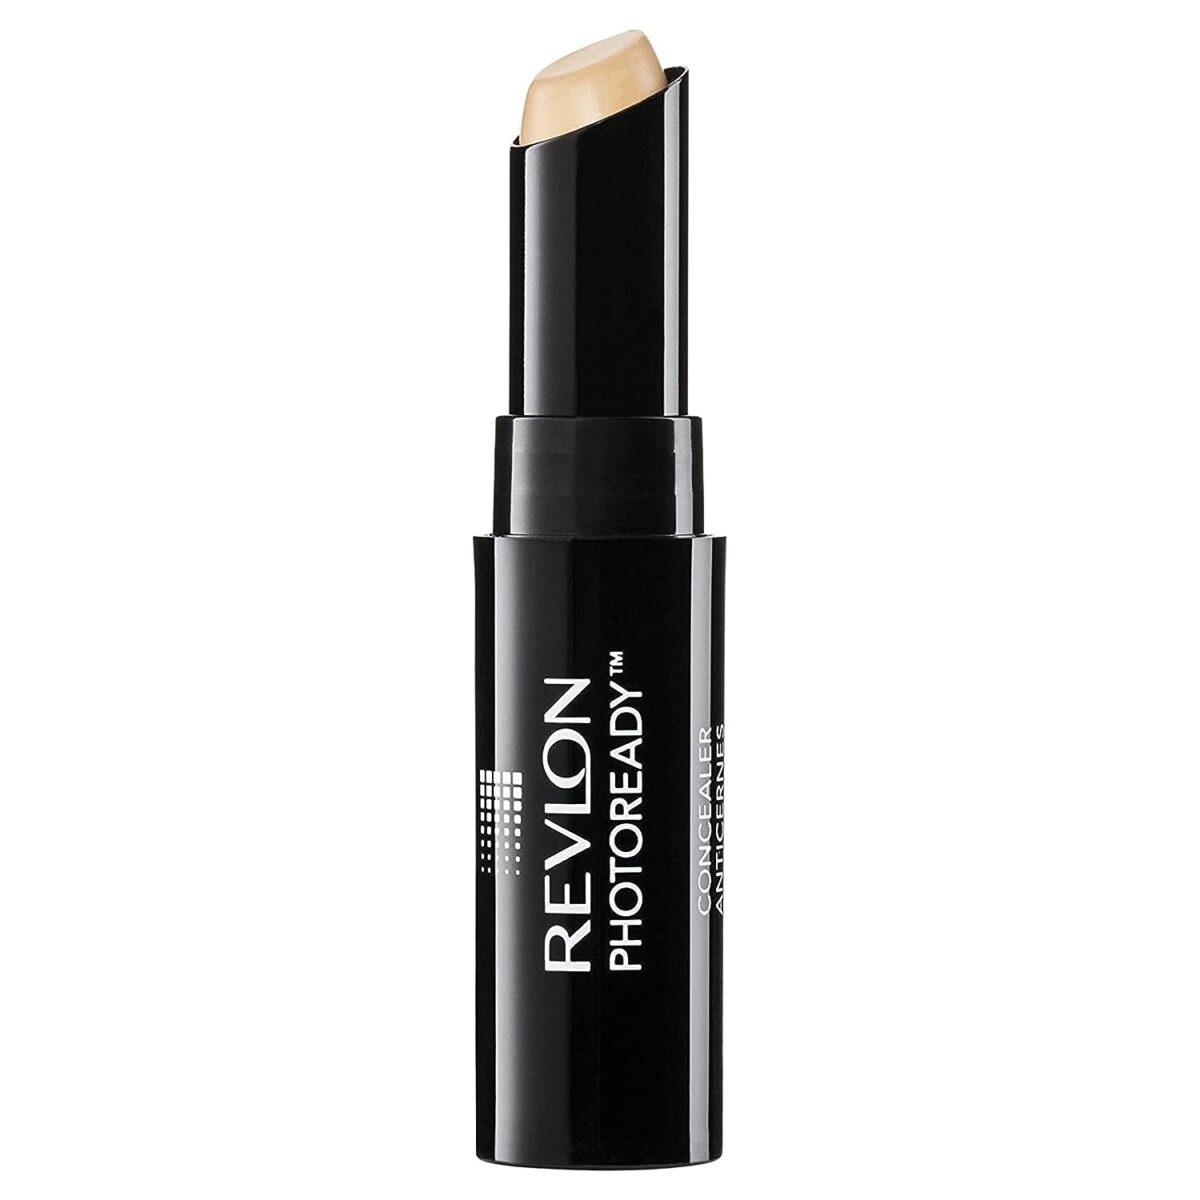 Skin Care, Cosmetics , Personal Care, Beauty, Photo Ready Concealer Stick